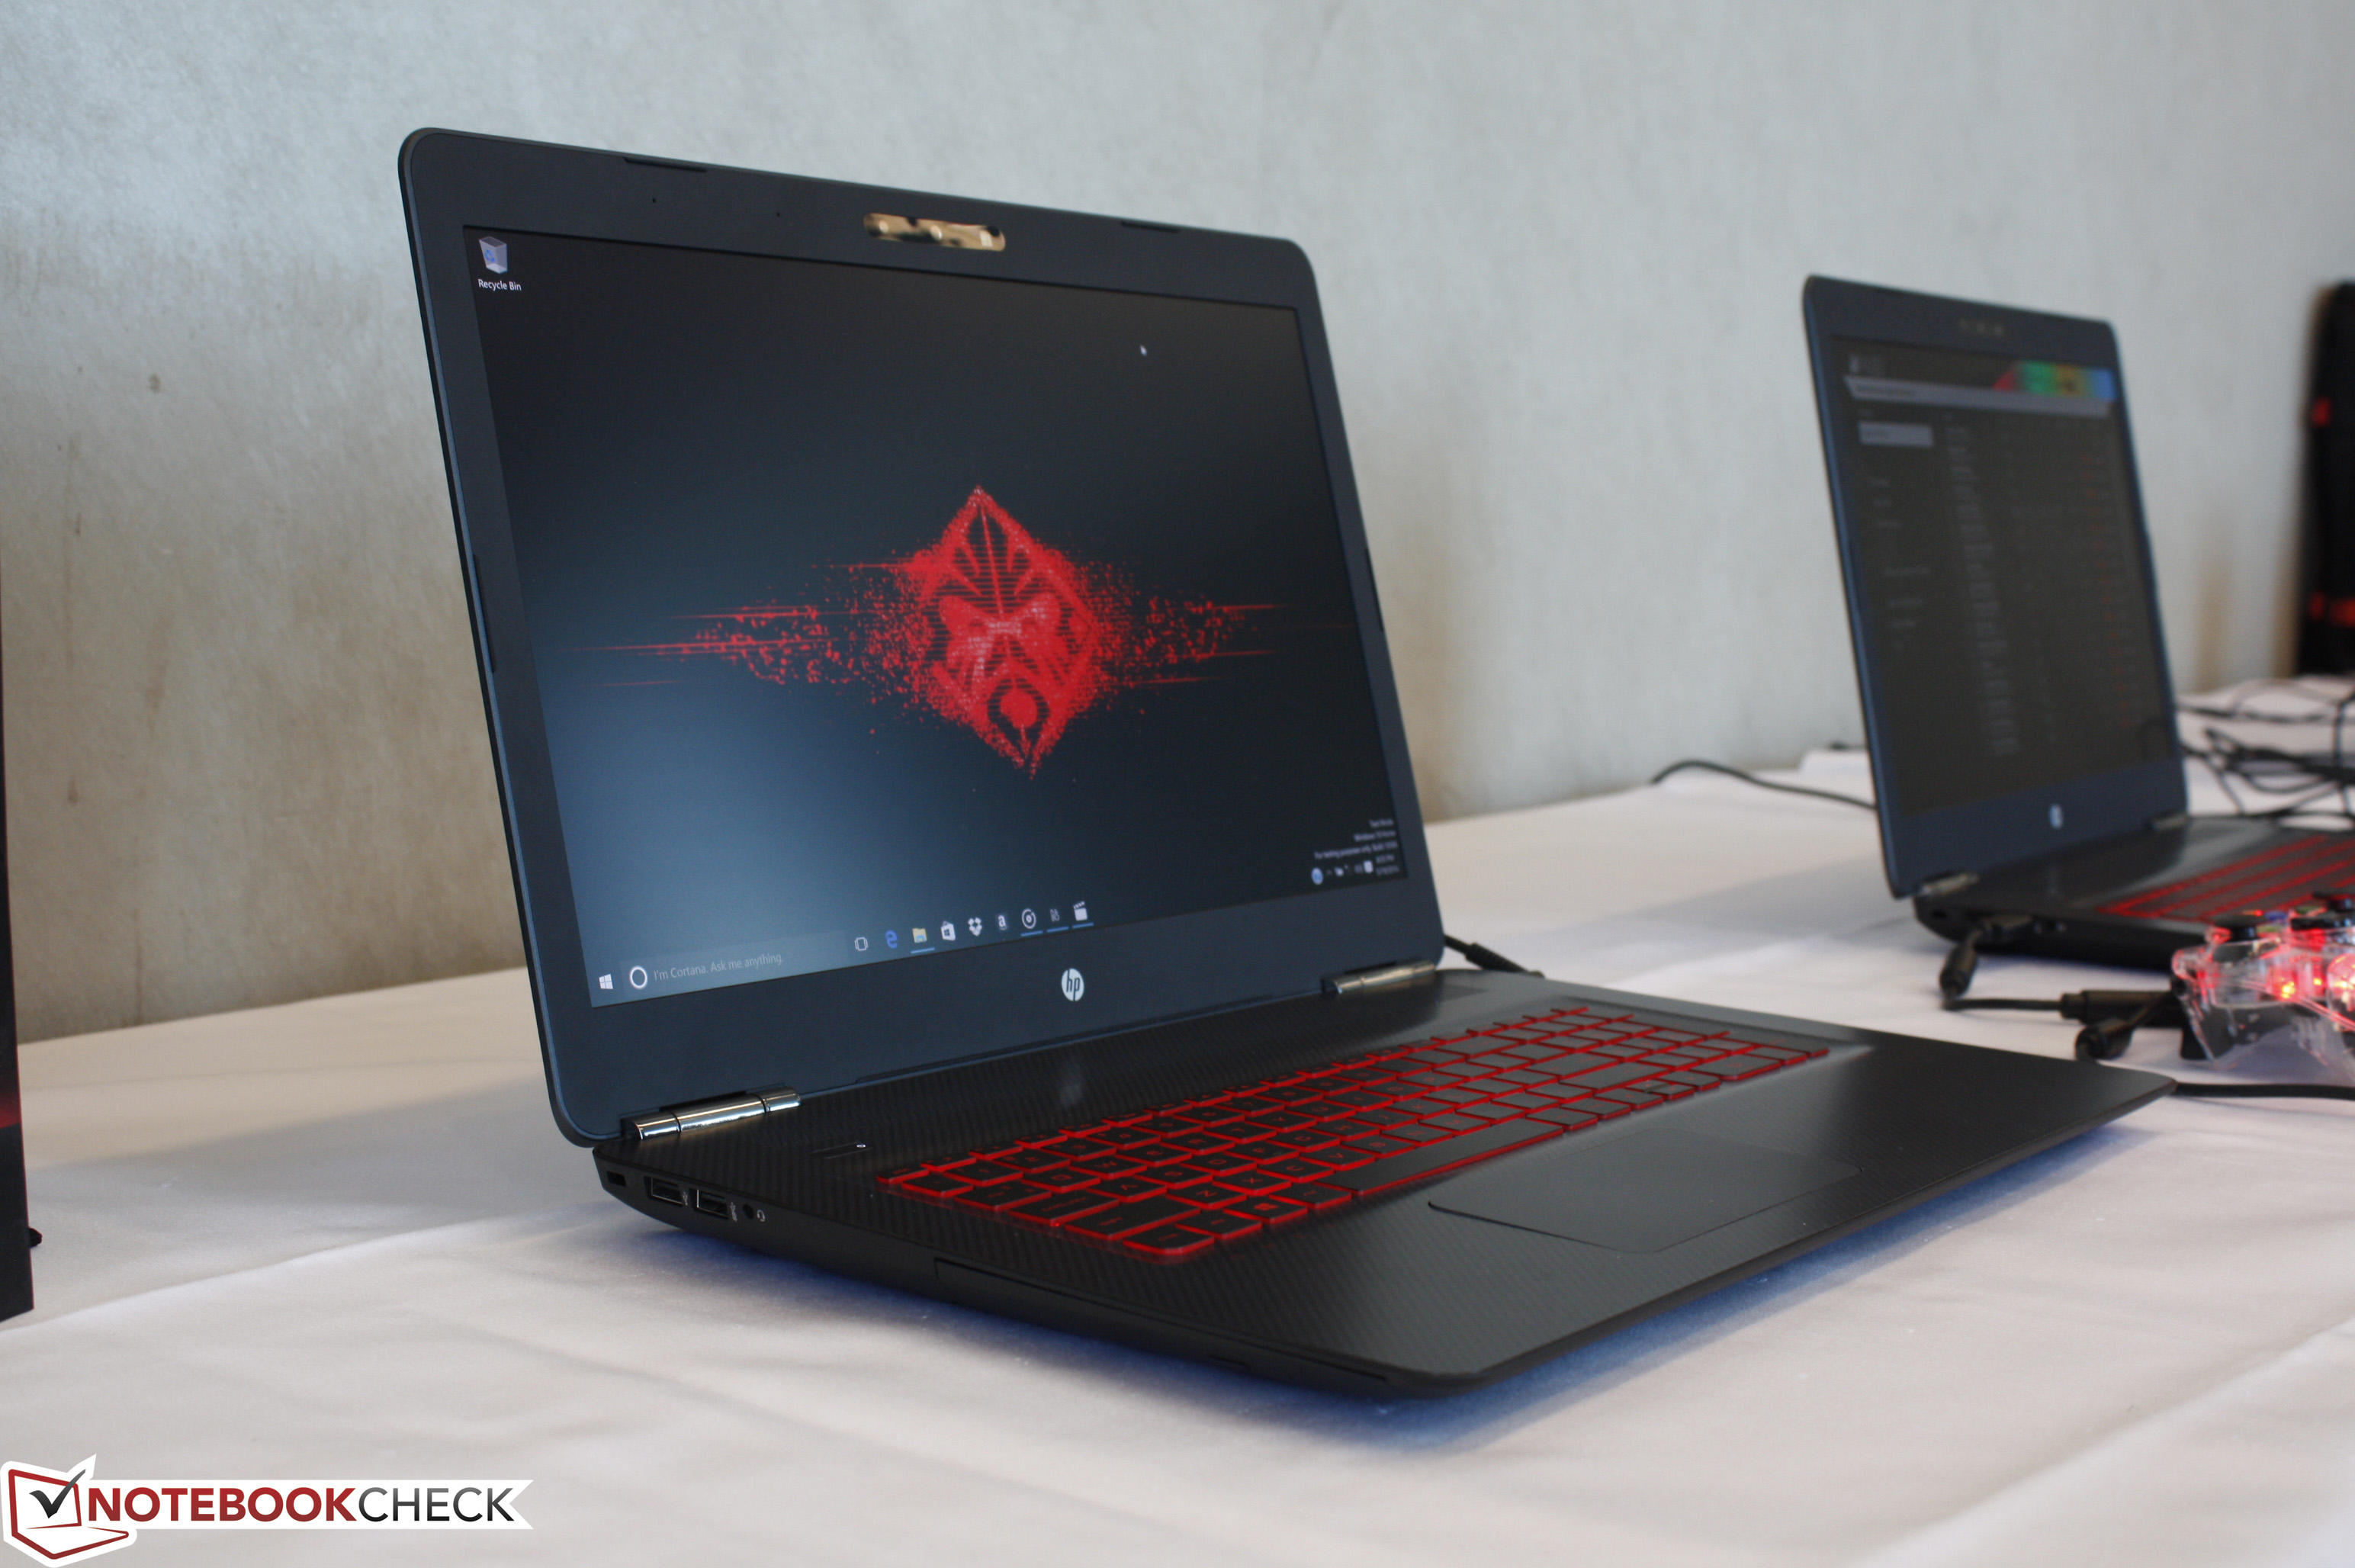 HP expands Omen gaming lineup with GTX 965M and 4K UHD